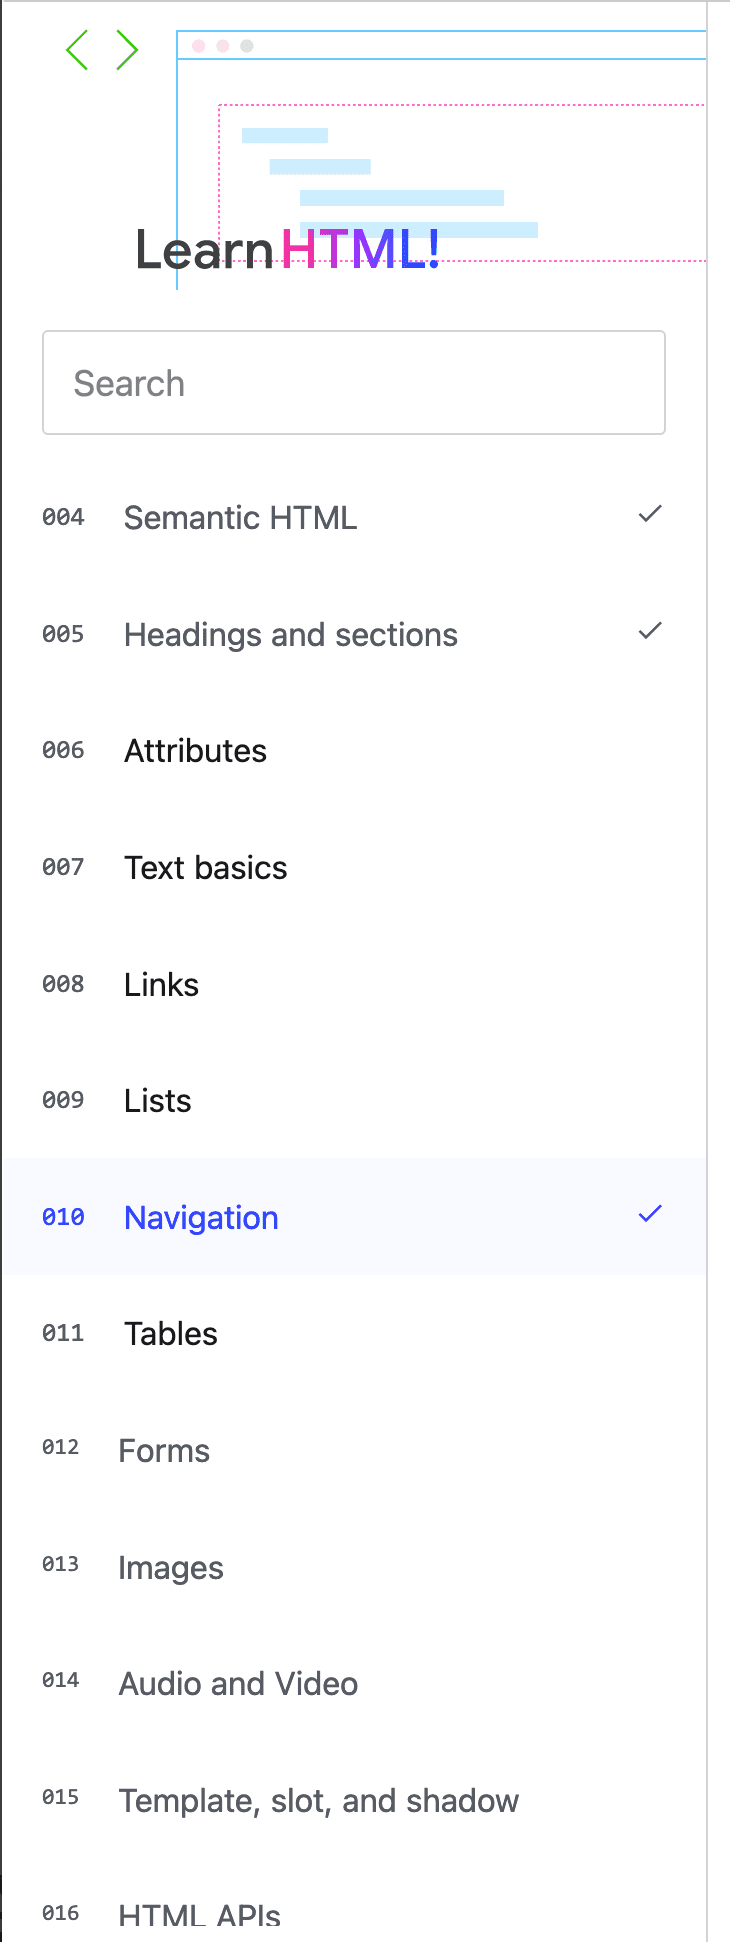 The local navigation is showing a checkmark next to the name of this chapter.